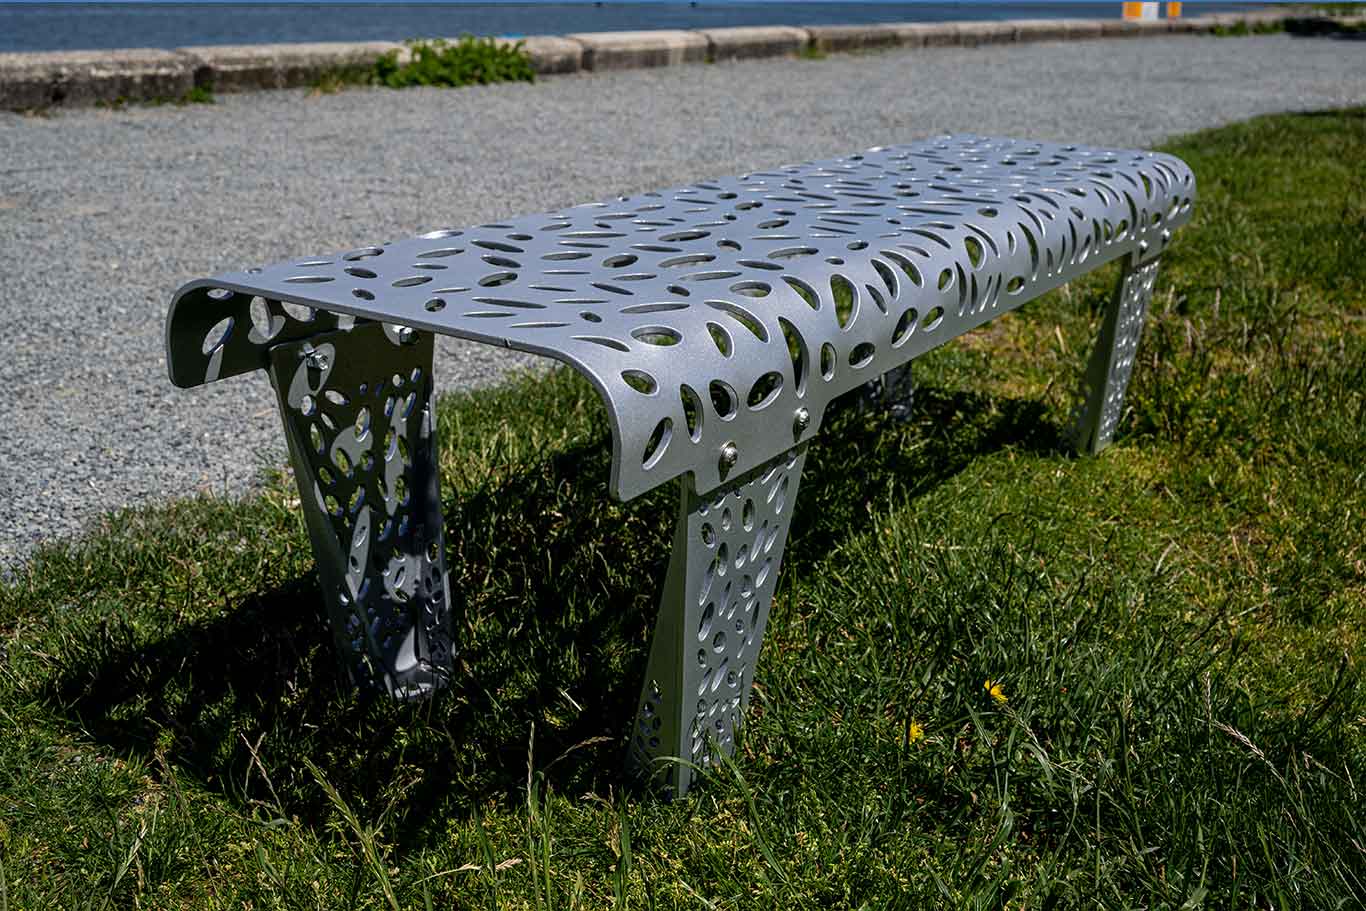 A silver bench sits on the grass beside a seawall, decorated with laser cut organic designs